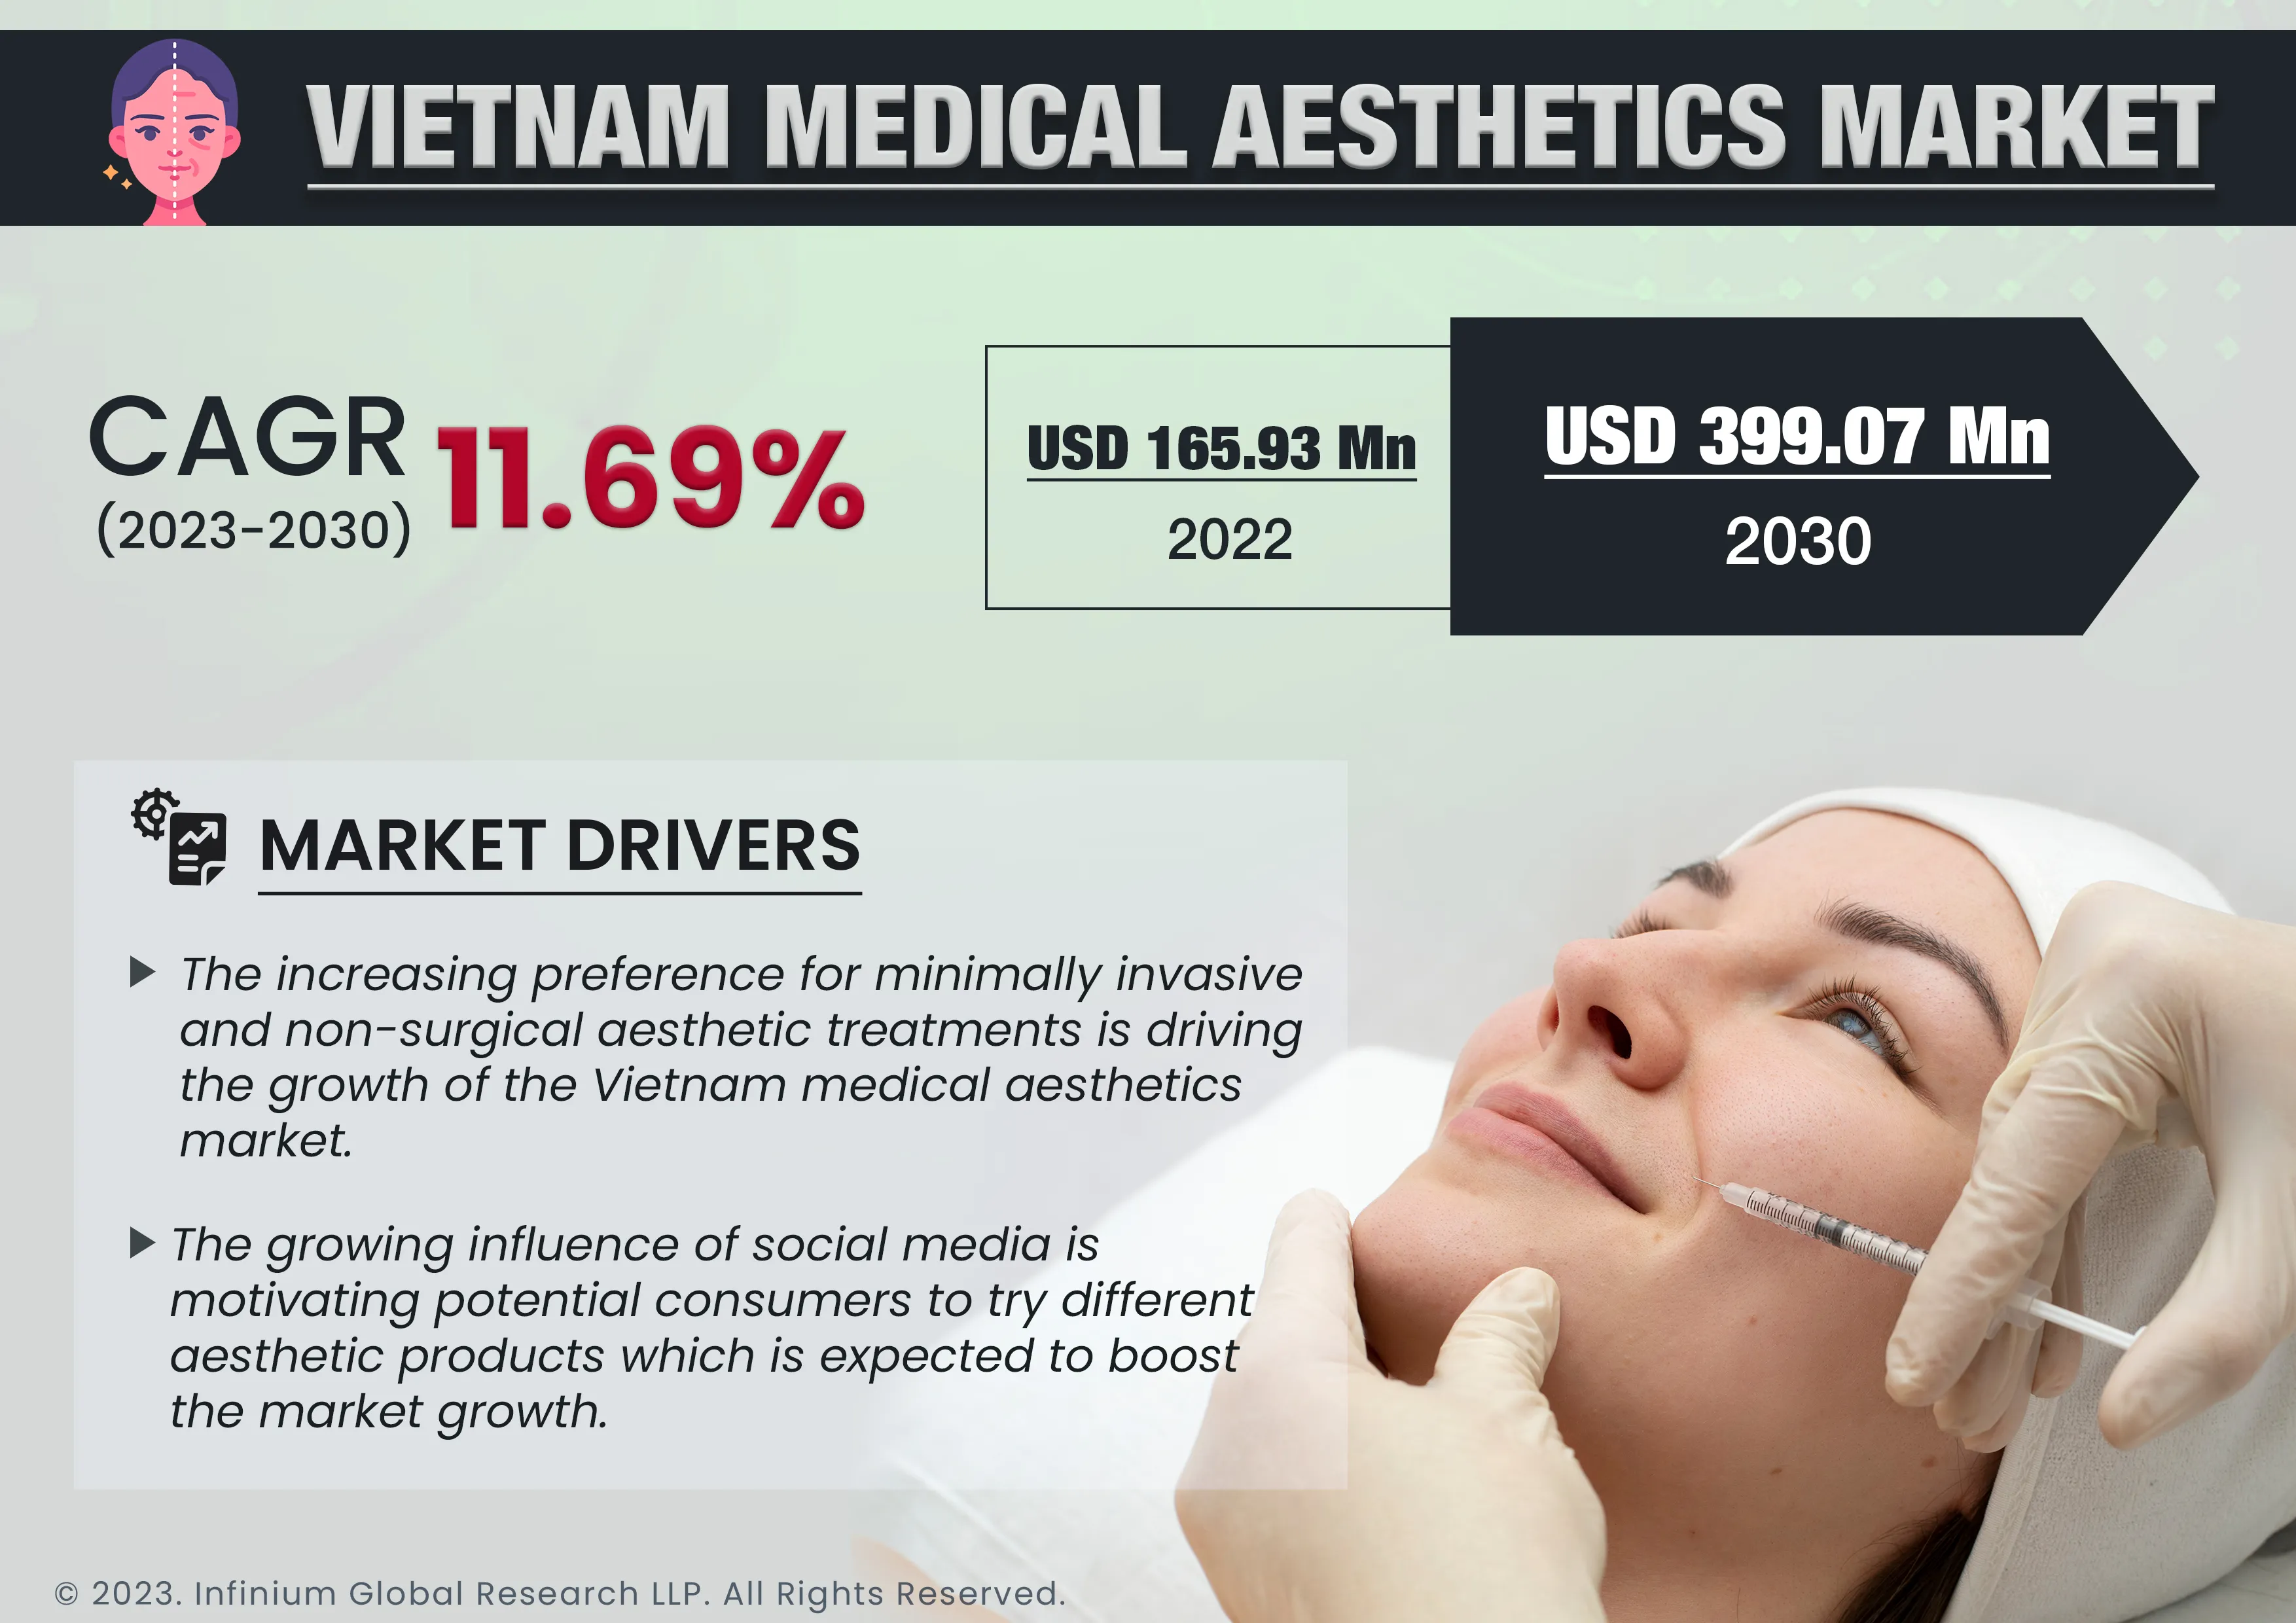 Vietnam Medical Aesthetics Market was Valued at USD 165.93 Million in 2022 and is Expected to Reach USD 399.07 Million by 2030 and Grow at a CAGR of 11.69% Over the Forecast Period.